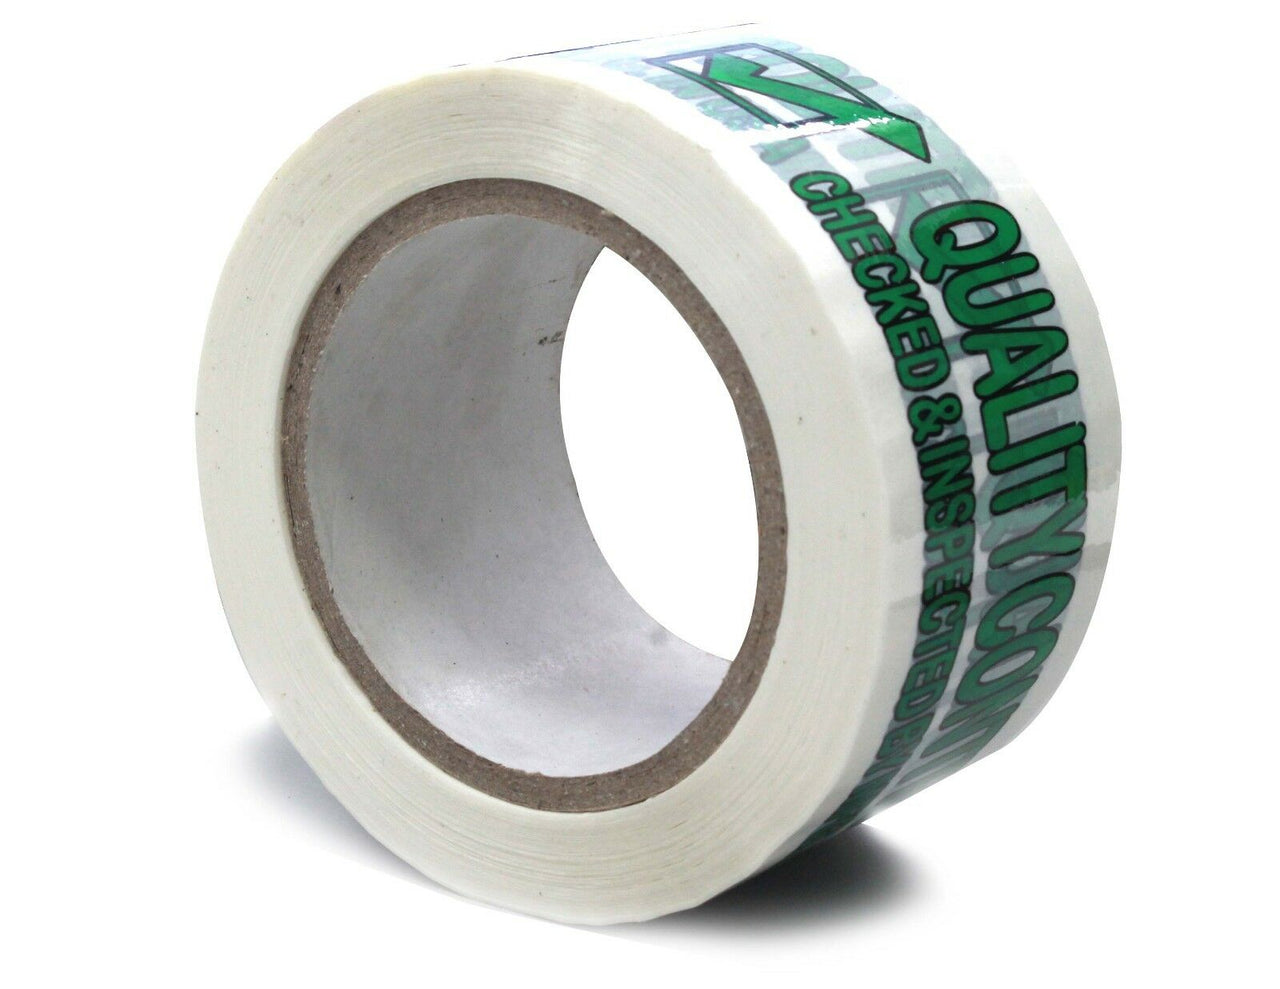 4 Rolls 3MIL Printed Quality Control Checked & Inspected by Mfg. In the USA TAPE 2.5" X 110 YARD